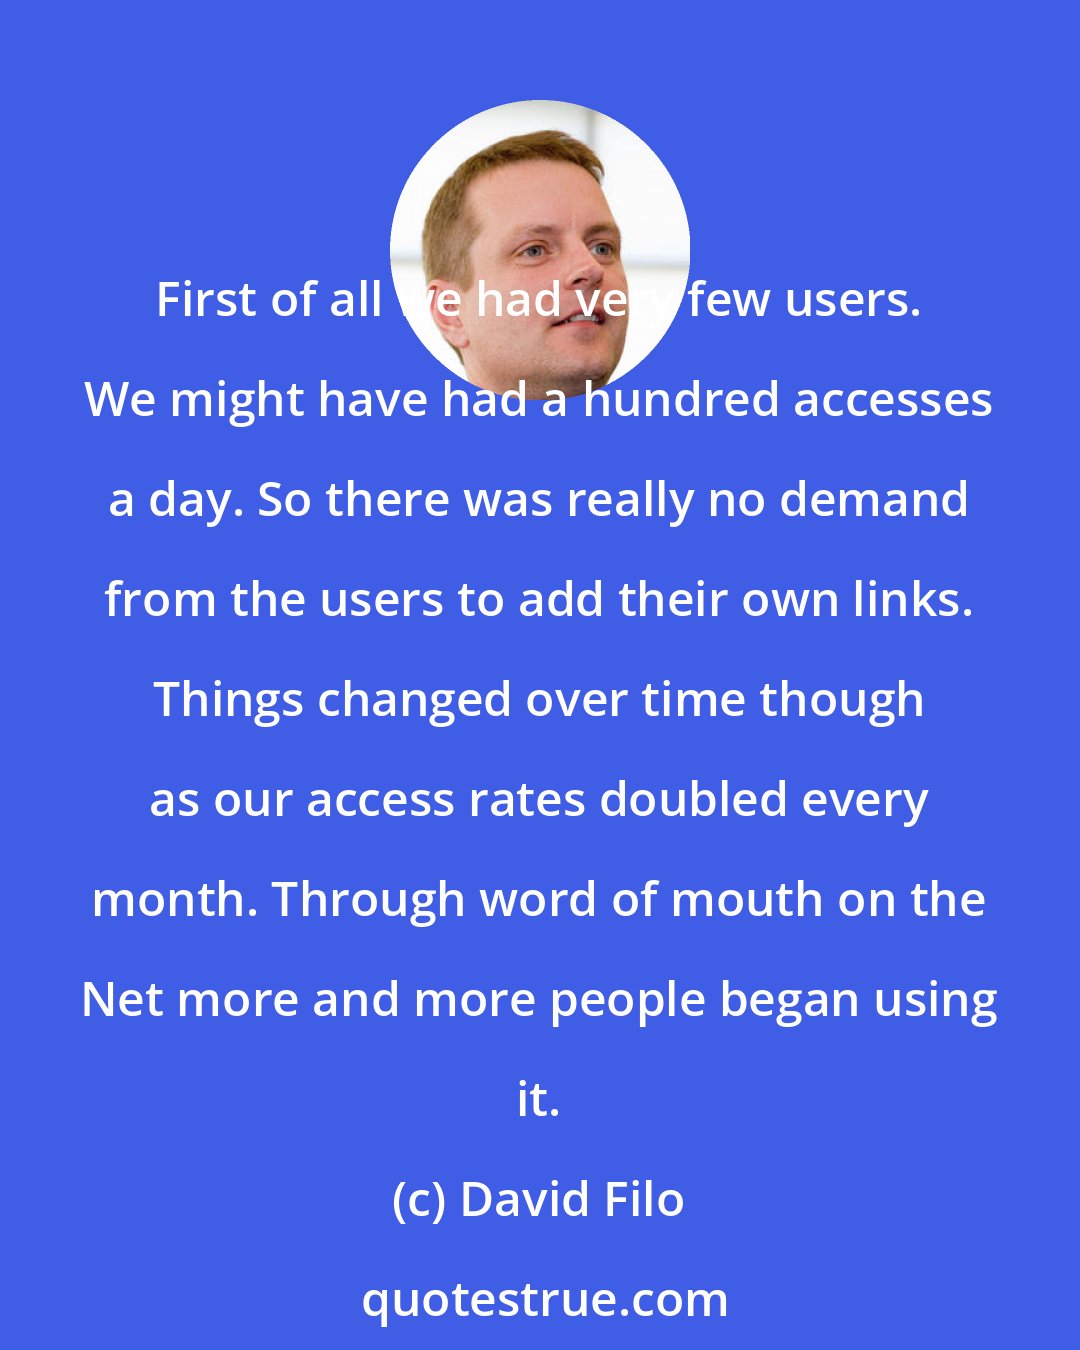 David Filo: First of all we had very few users. We might have had a hundred accesses a day. So there was really no demand from the users to add their own links. Things changed over time though as our access rates doubled every month. Through word of mouth on the Net more and more people began using it.